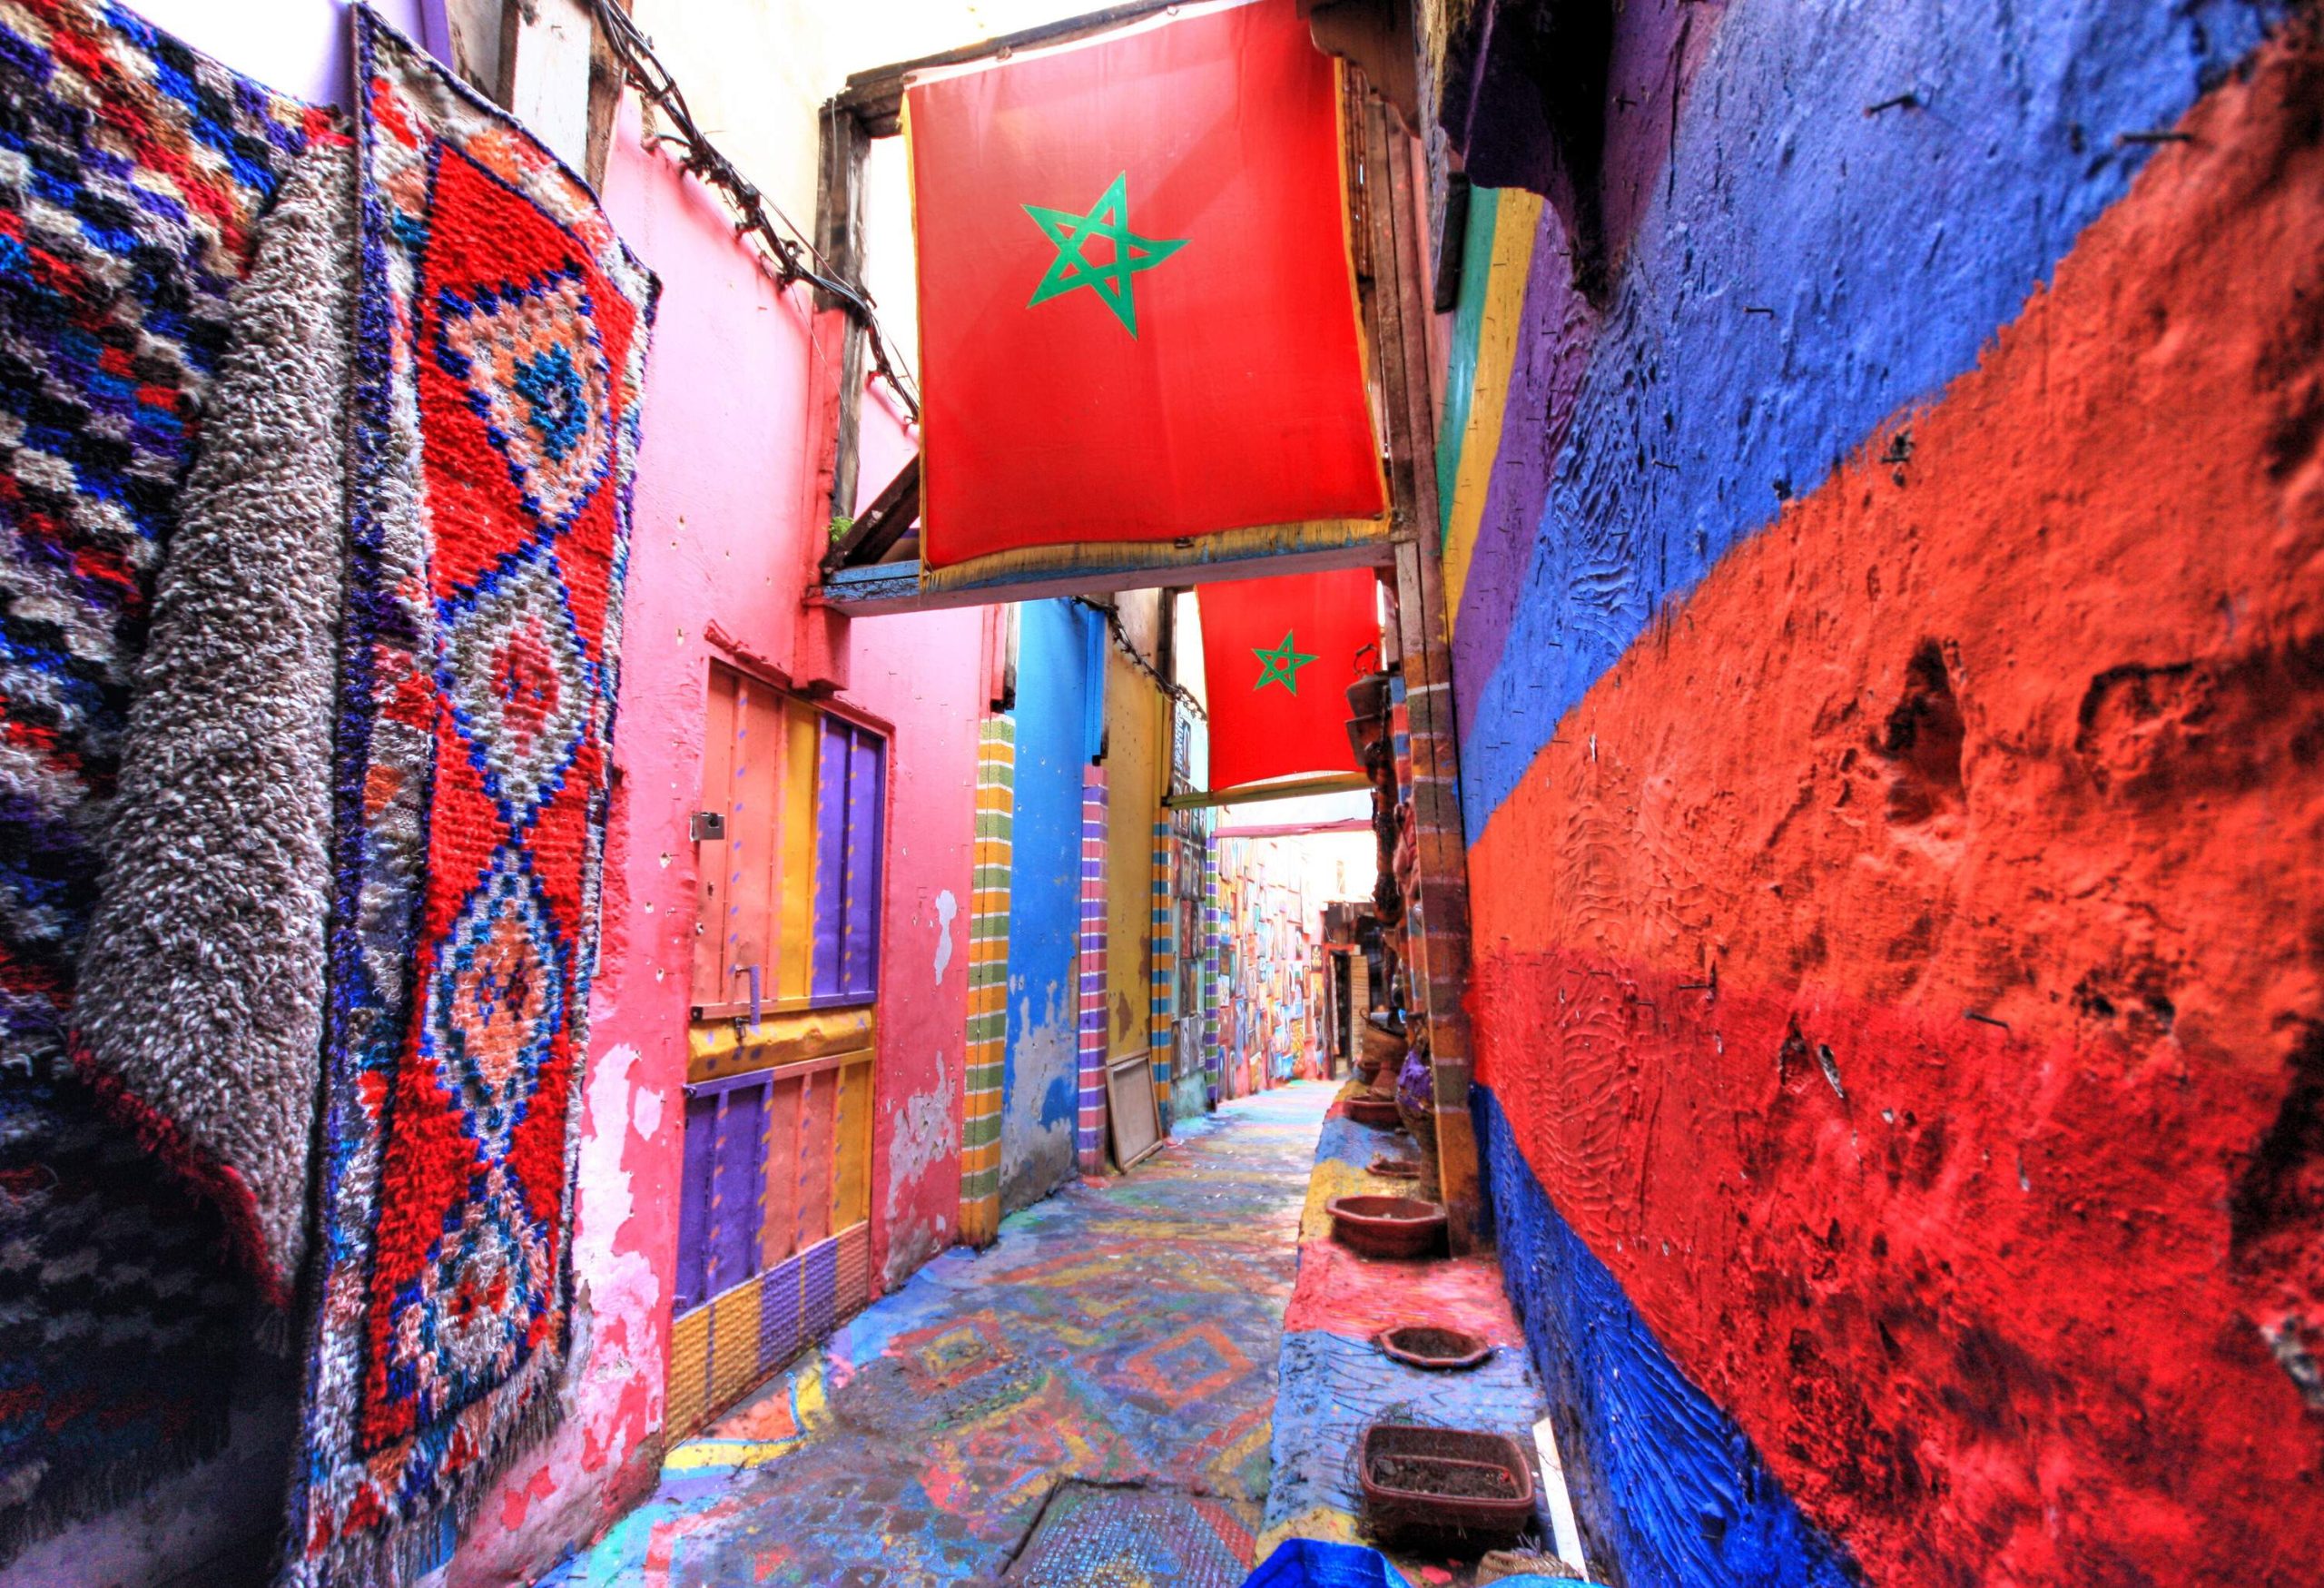 Narrow alley with colourful walls and floors with the Moroccan flag placed overhead.